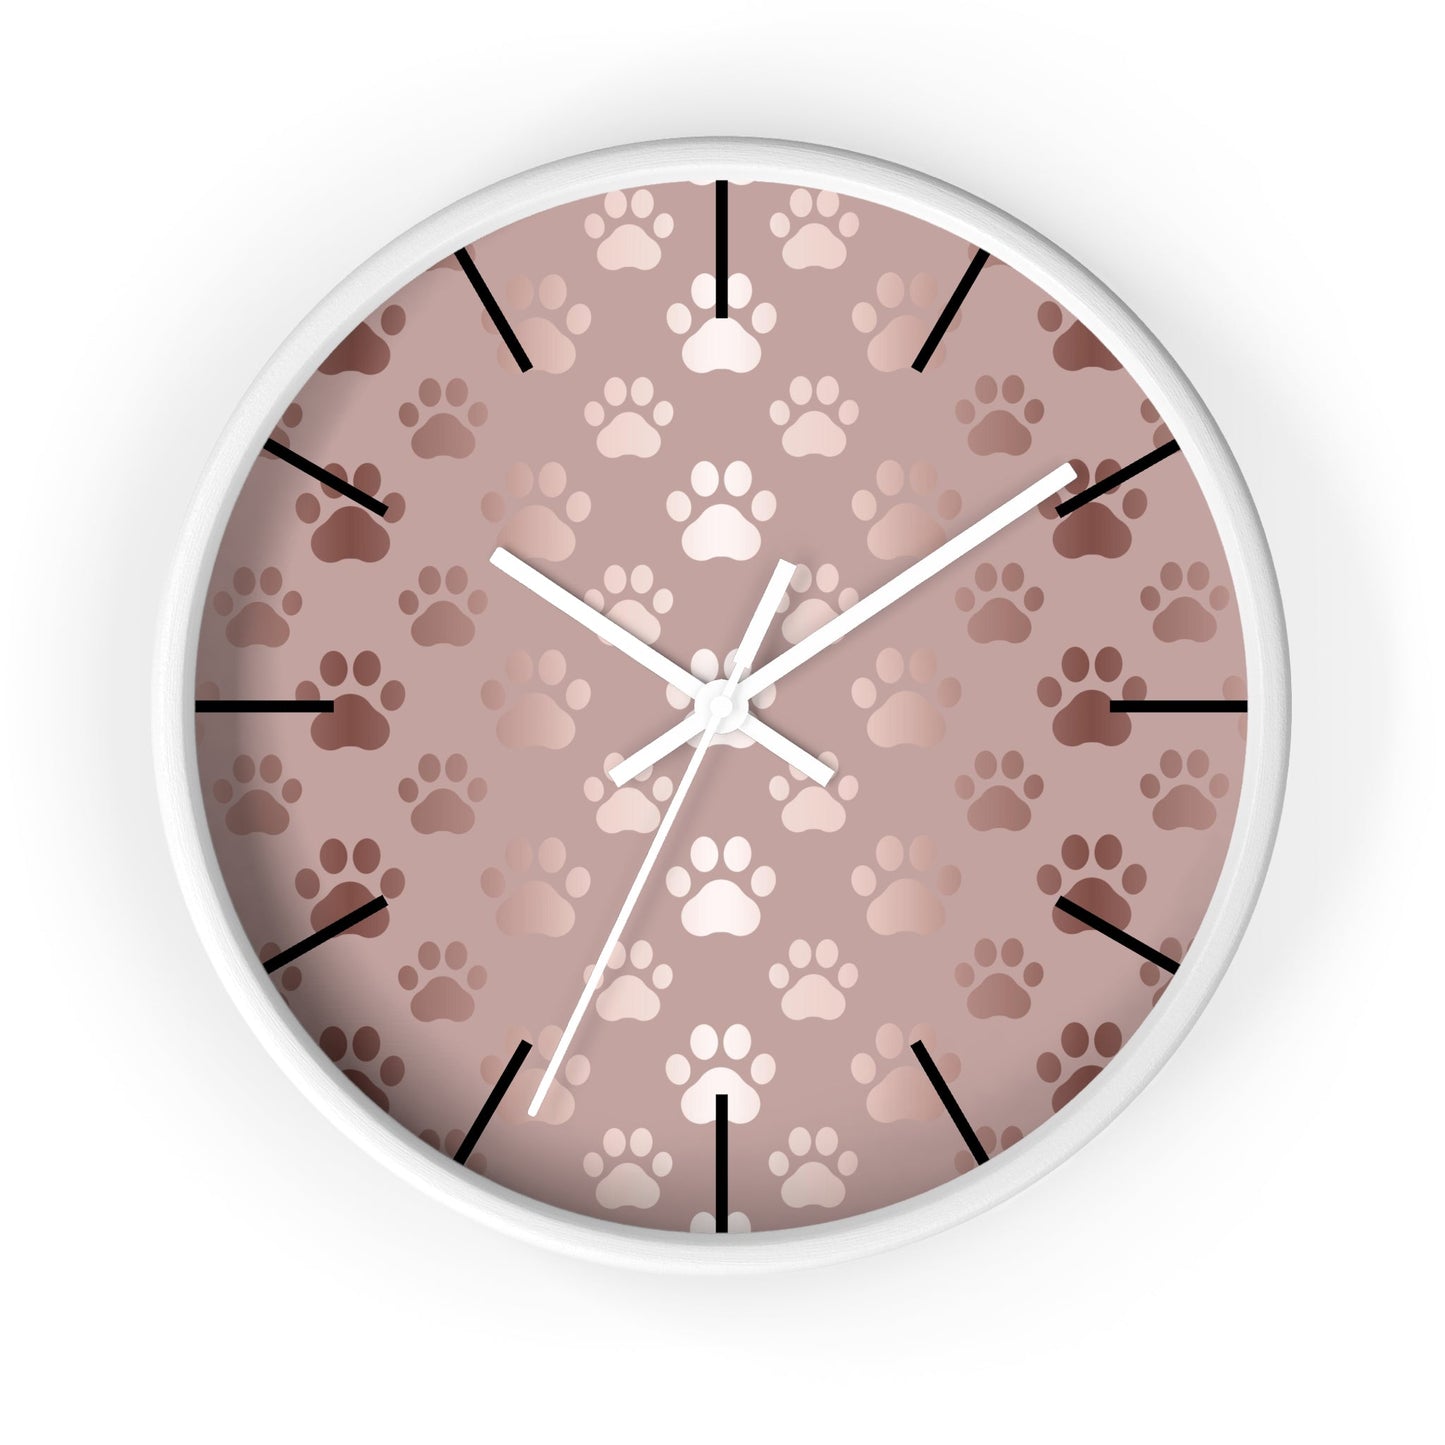 Shimmery Paws Wall Clock - Home Decor - Epileptic Al’s Shop